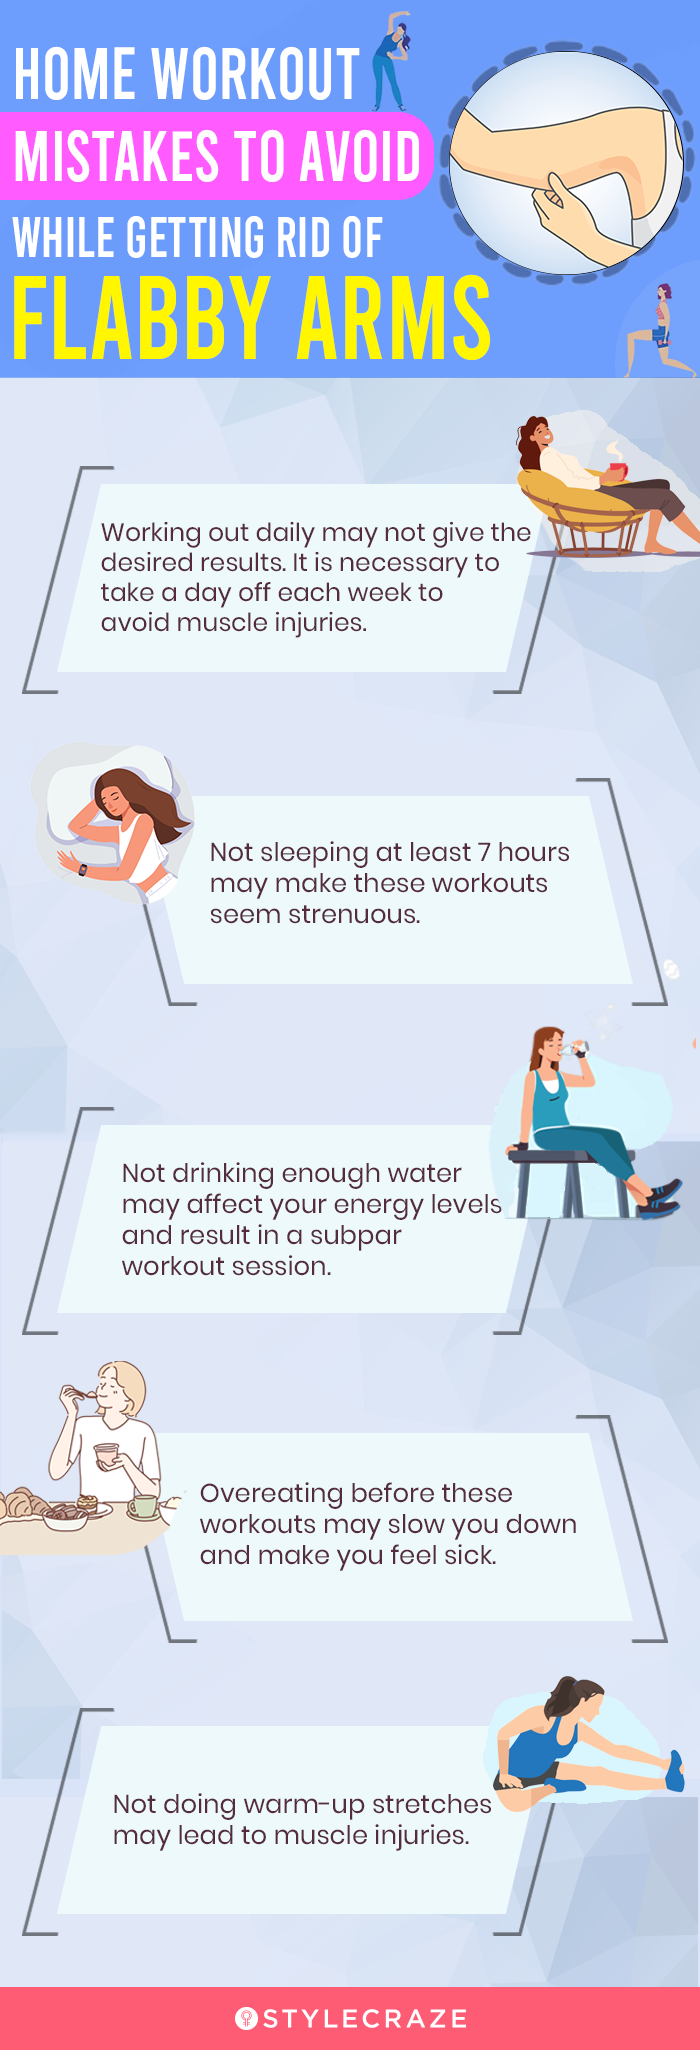 home workout mistakes to avoid while getting rid of flabby arms[infographic]